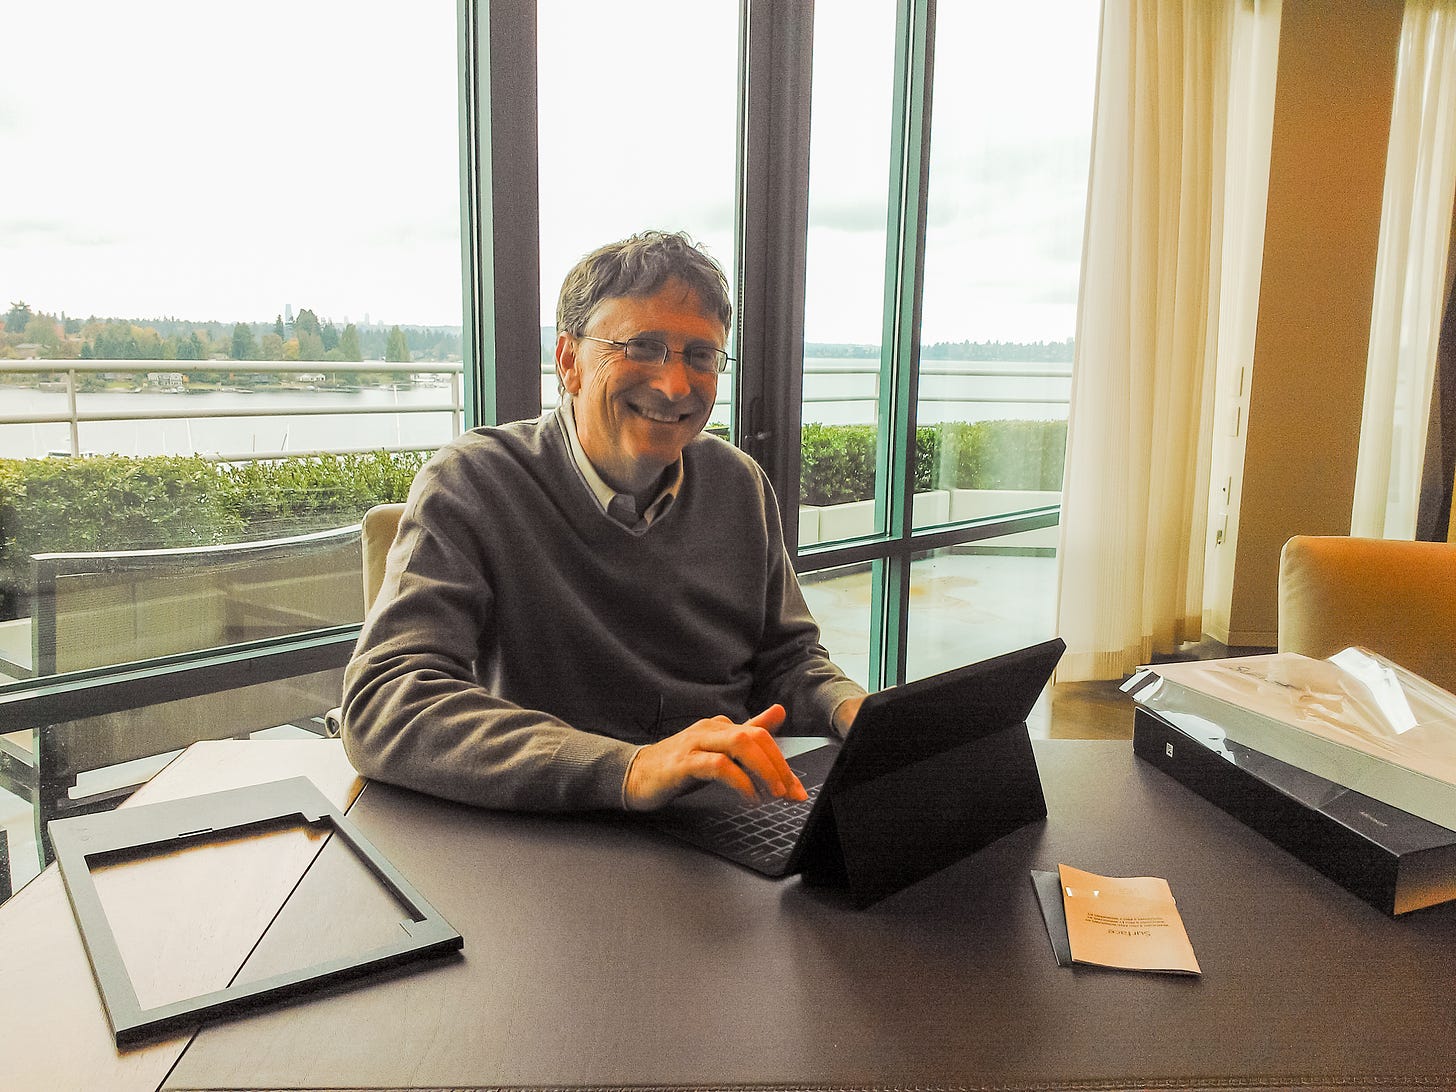 Bill Gates at desk overlooking the water view, with Surface RT use out of the box.